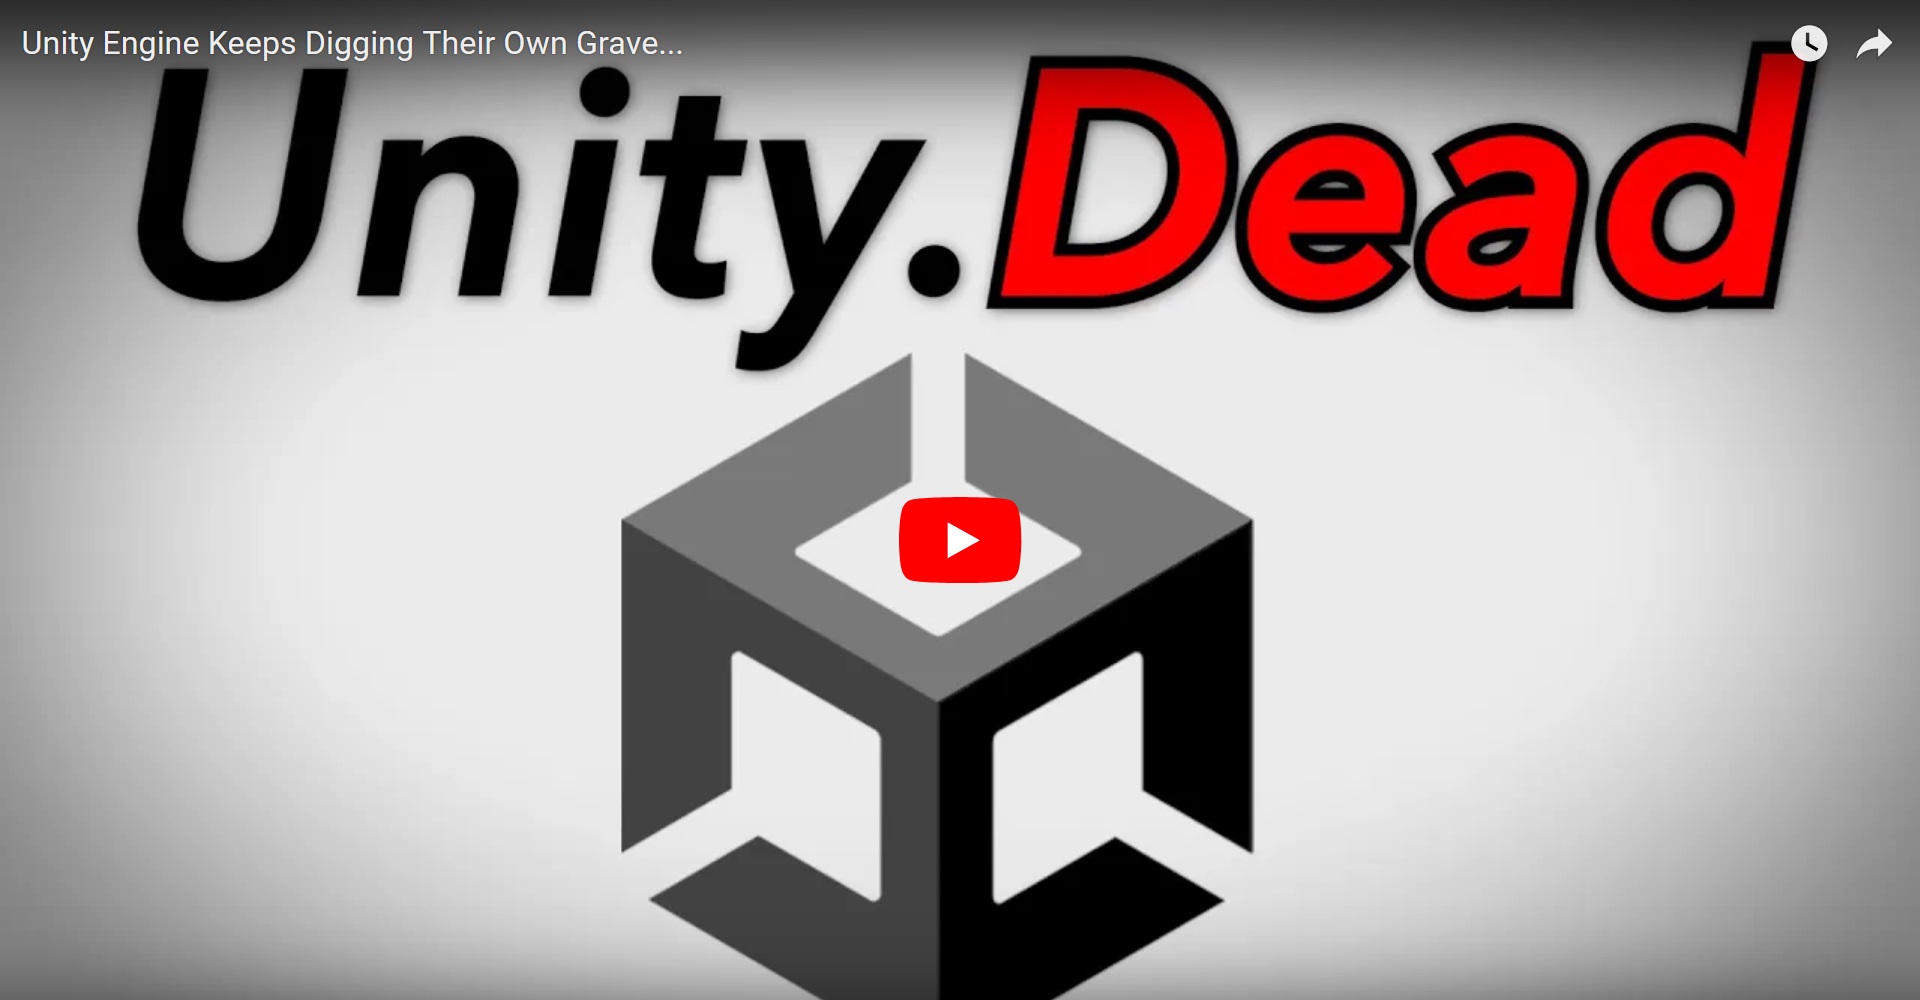 Unity is Dead!